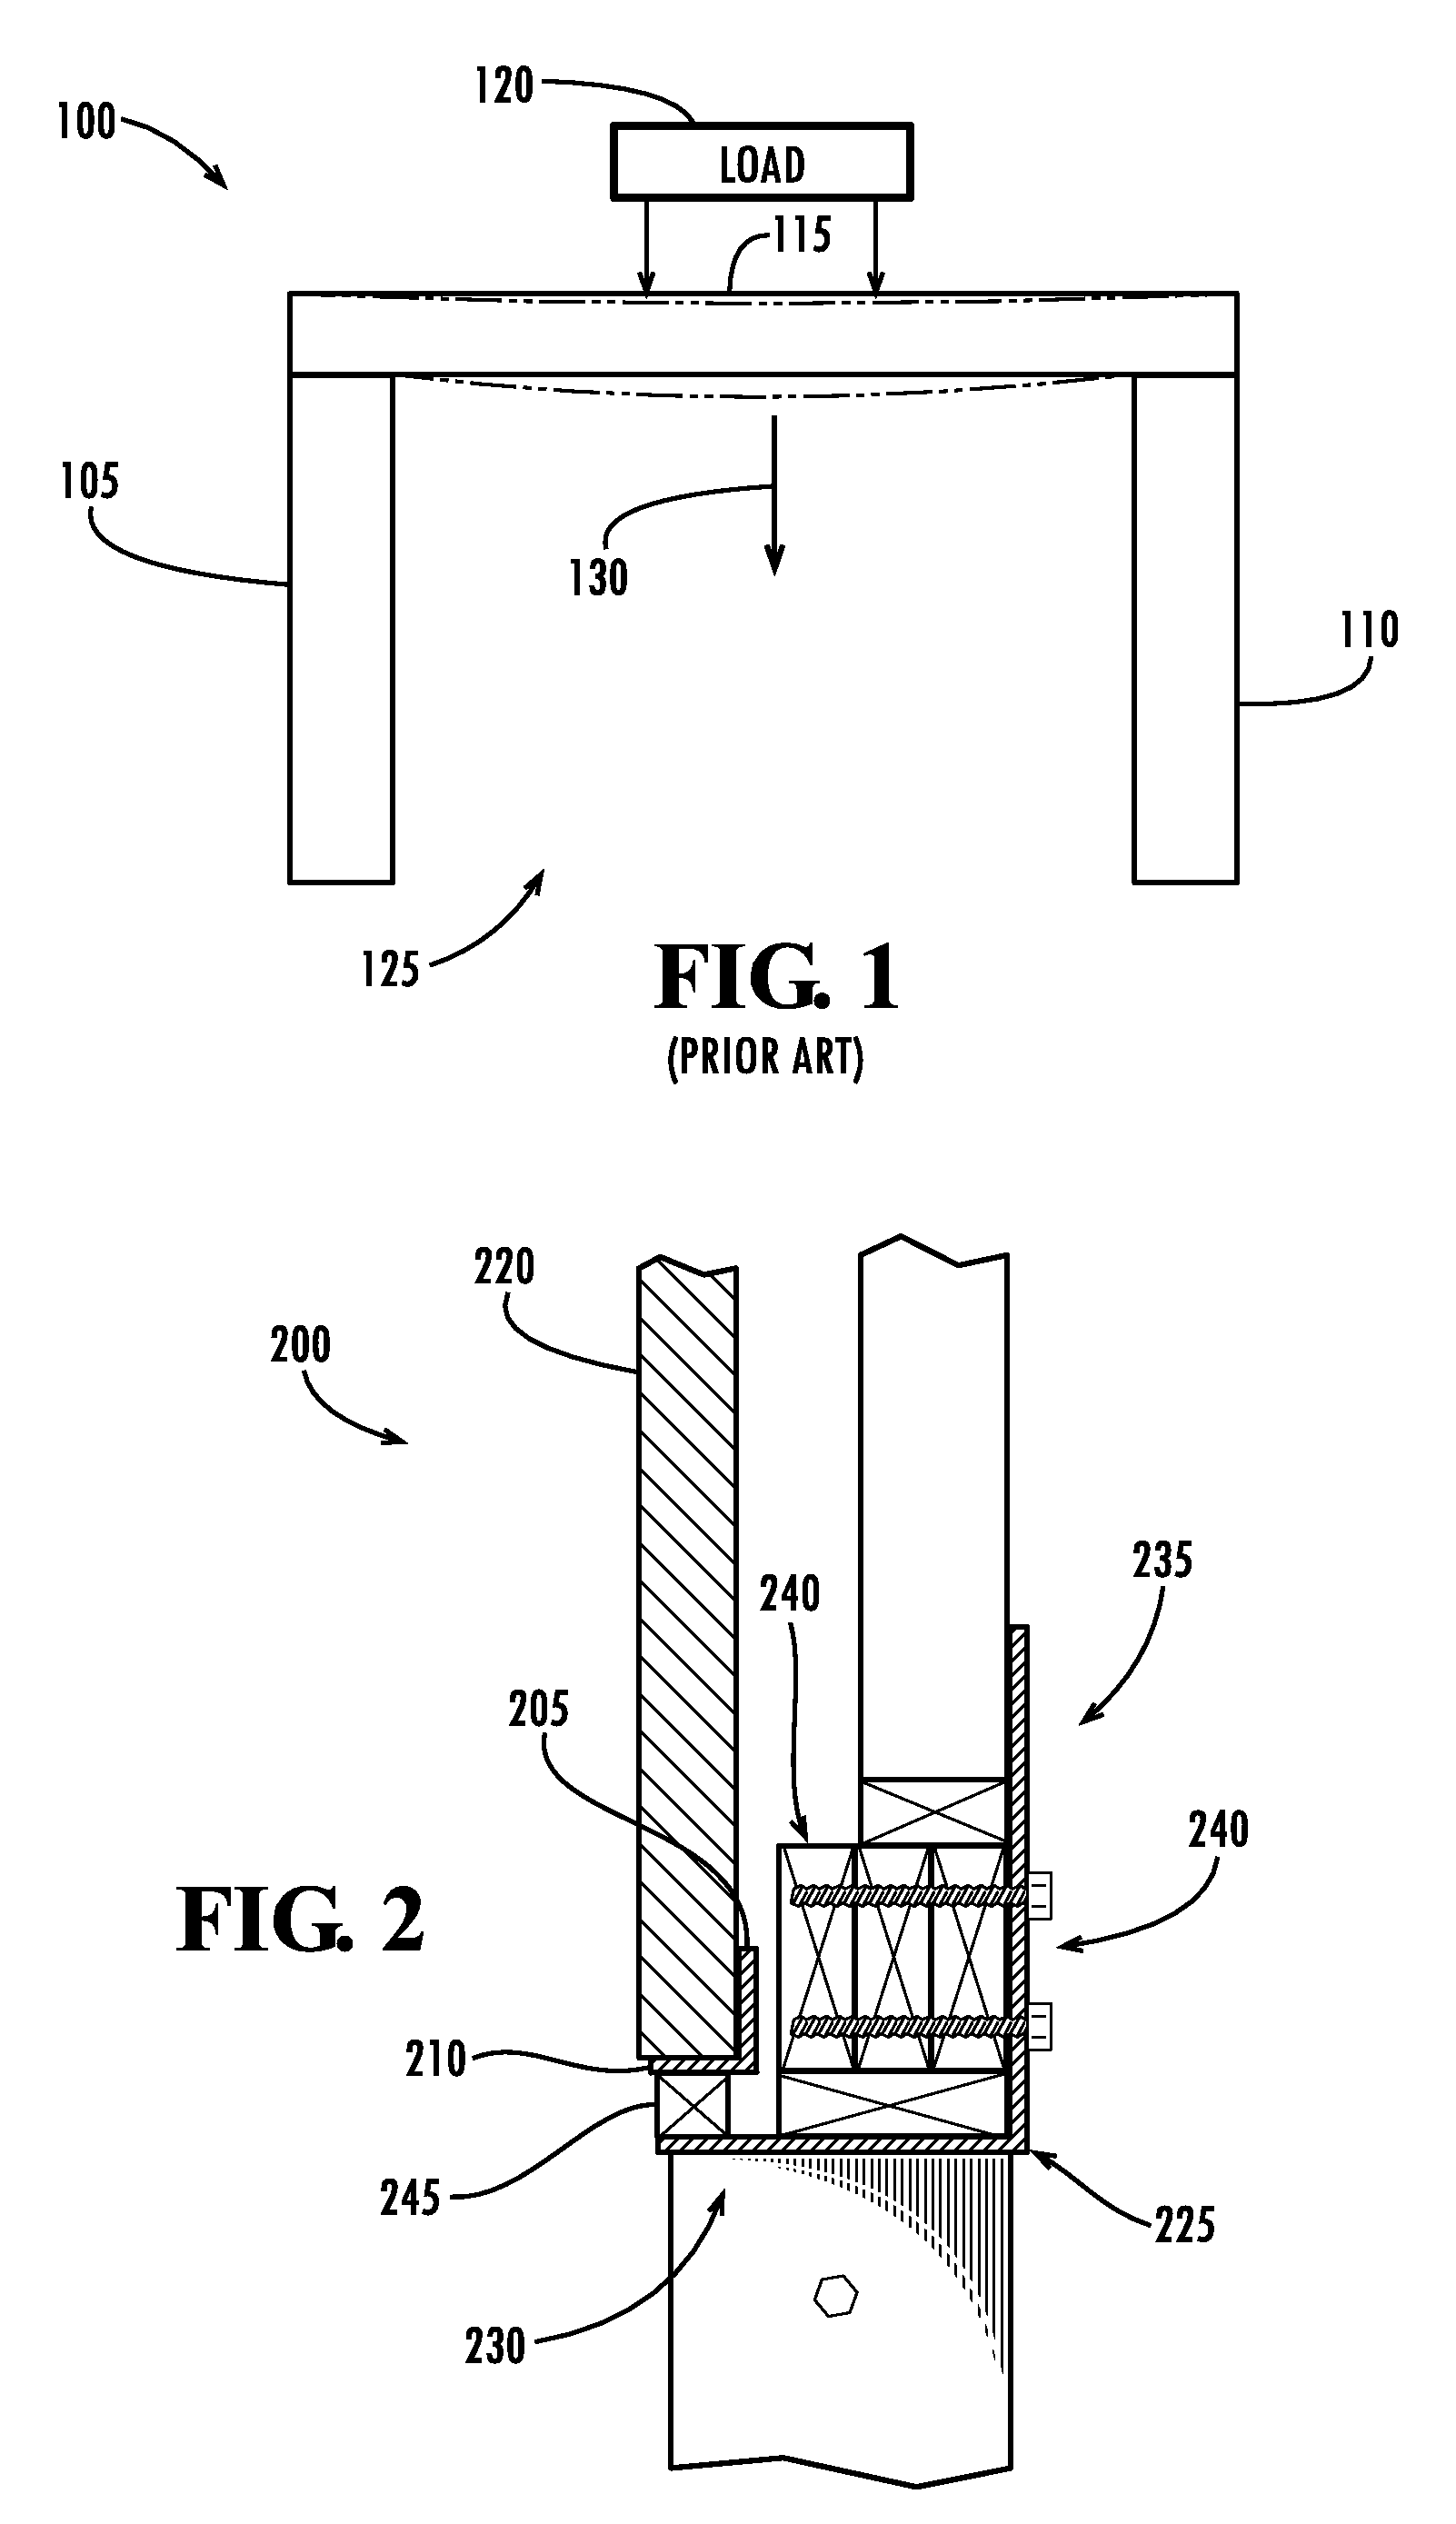 Structural support systems and methods to reinforce lintel support systems